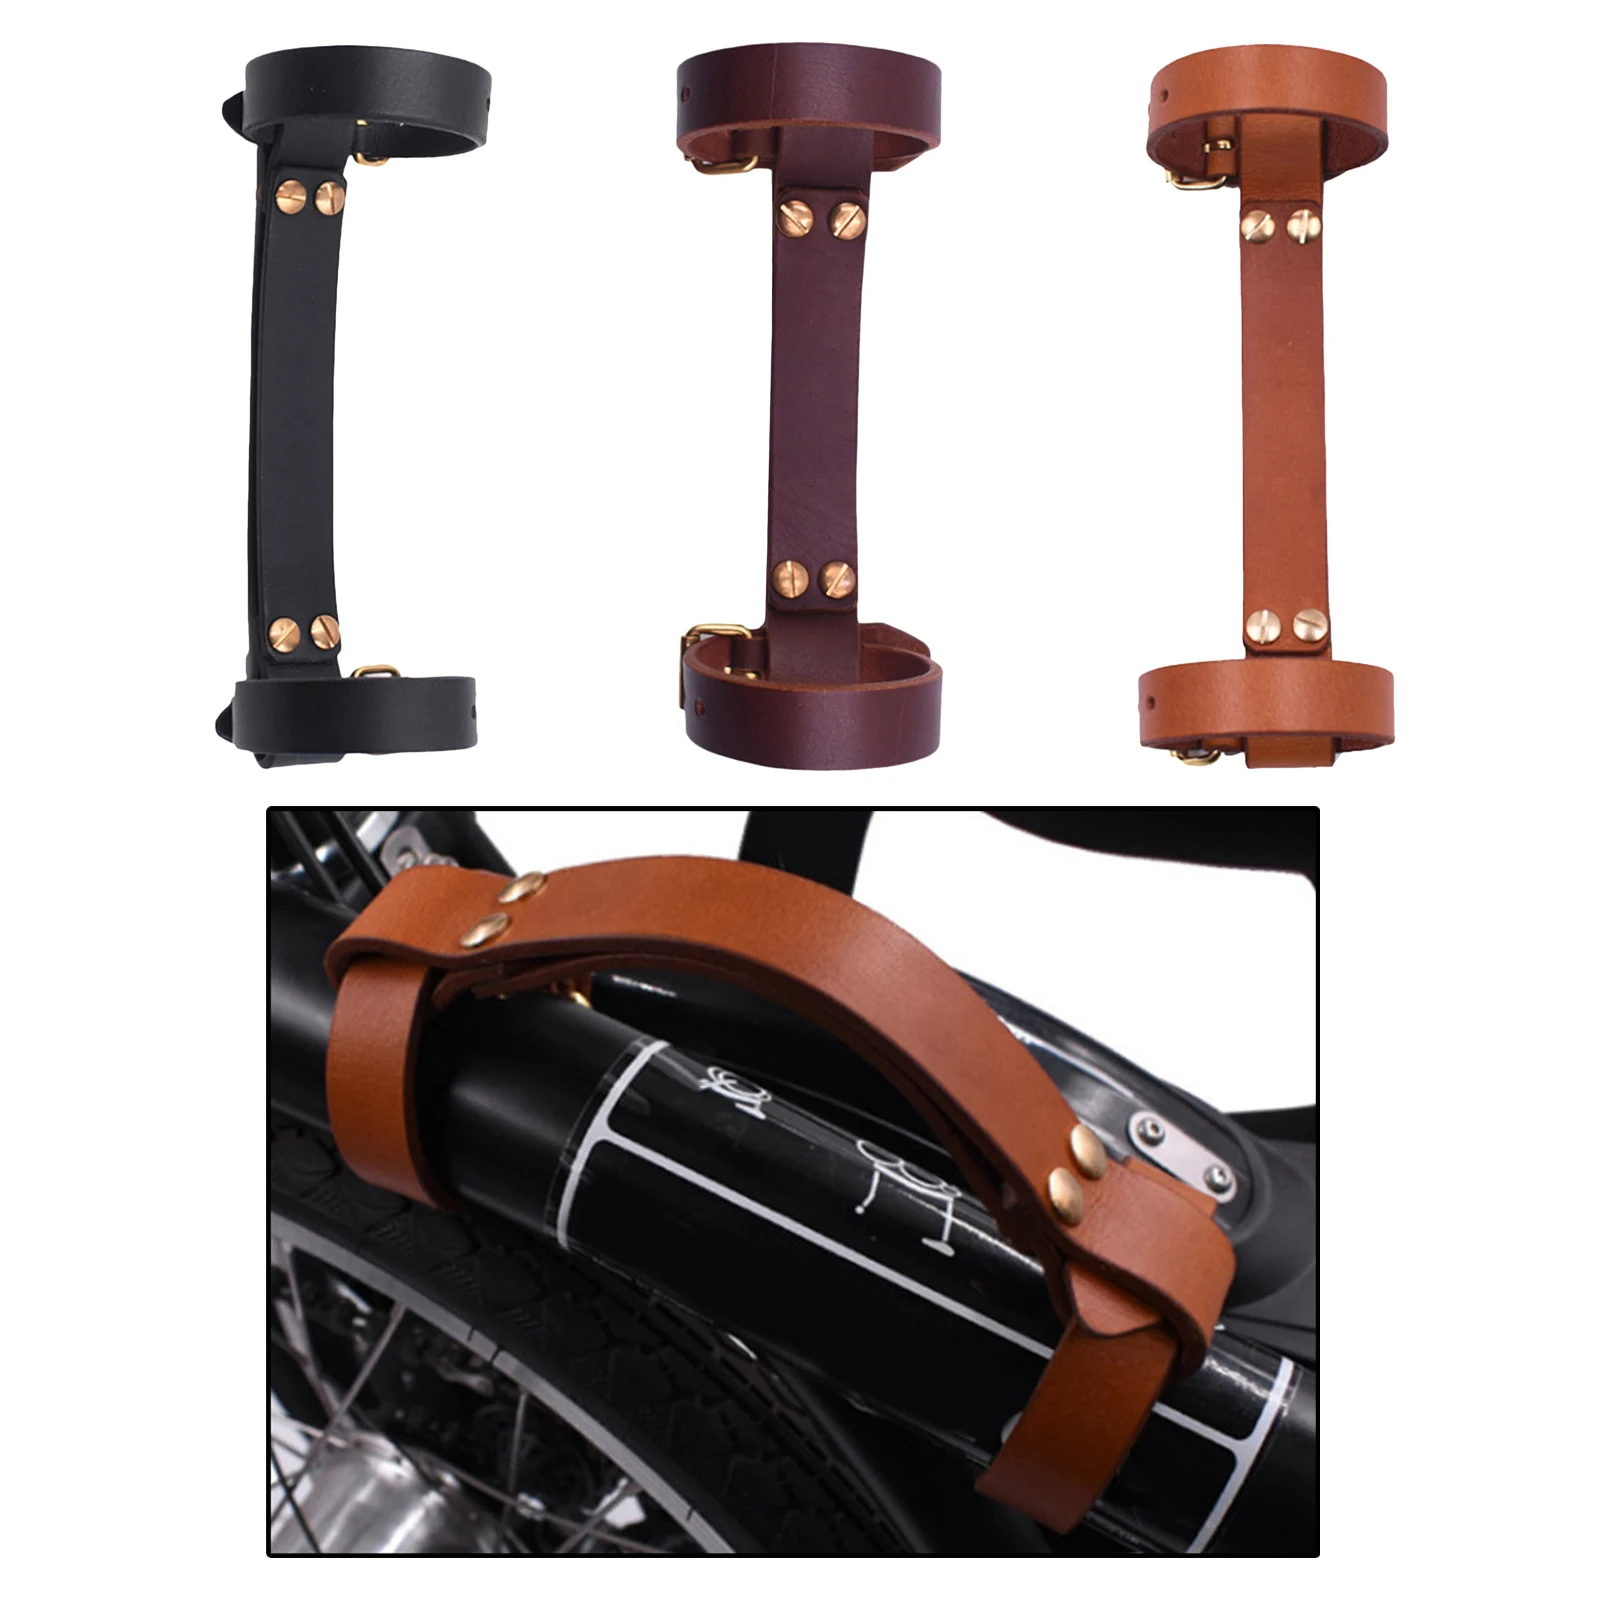 Foldable Bicycle Handgrip Bike Handlebar Handle Straps Accessories Exquisite for Travel